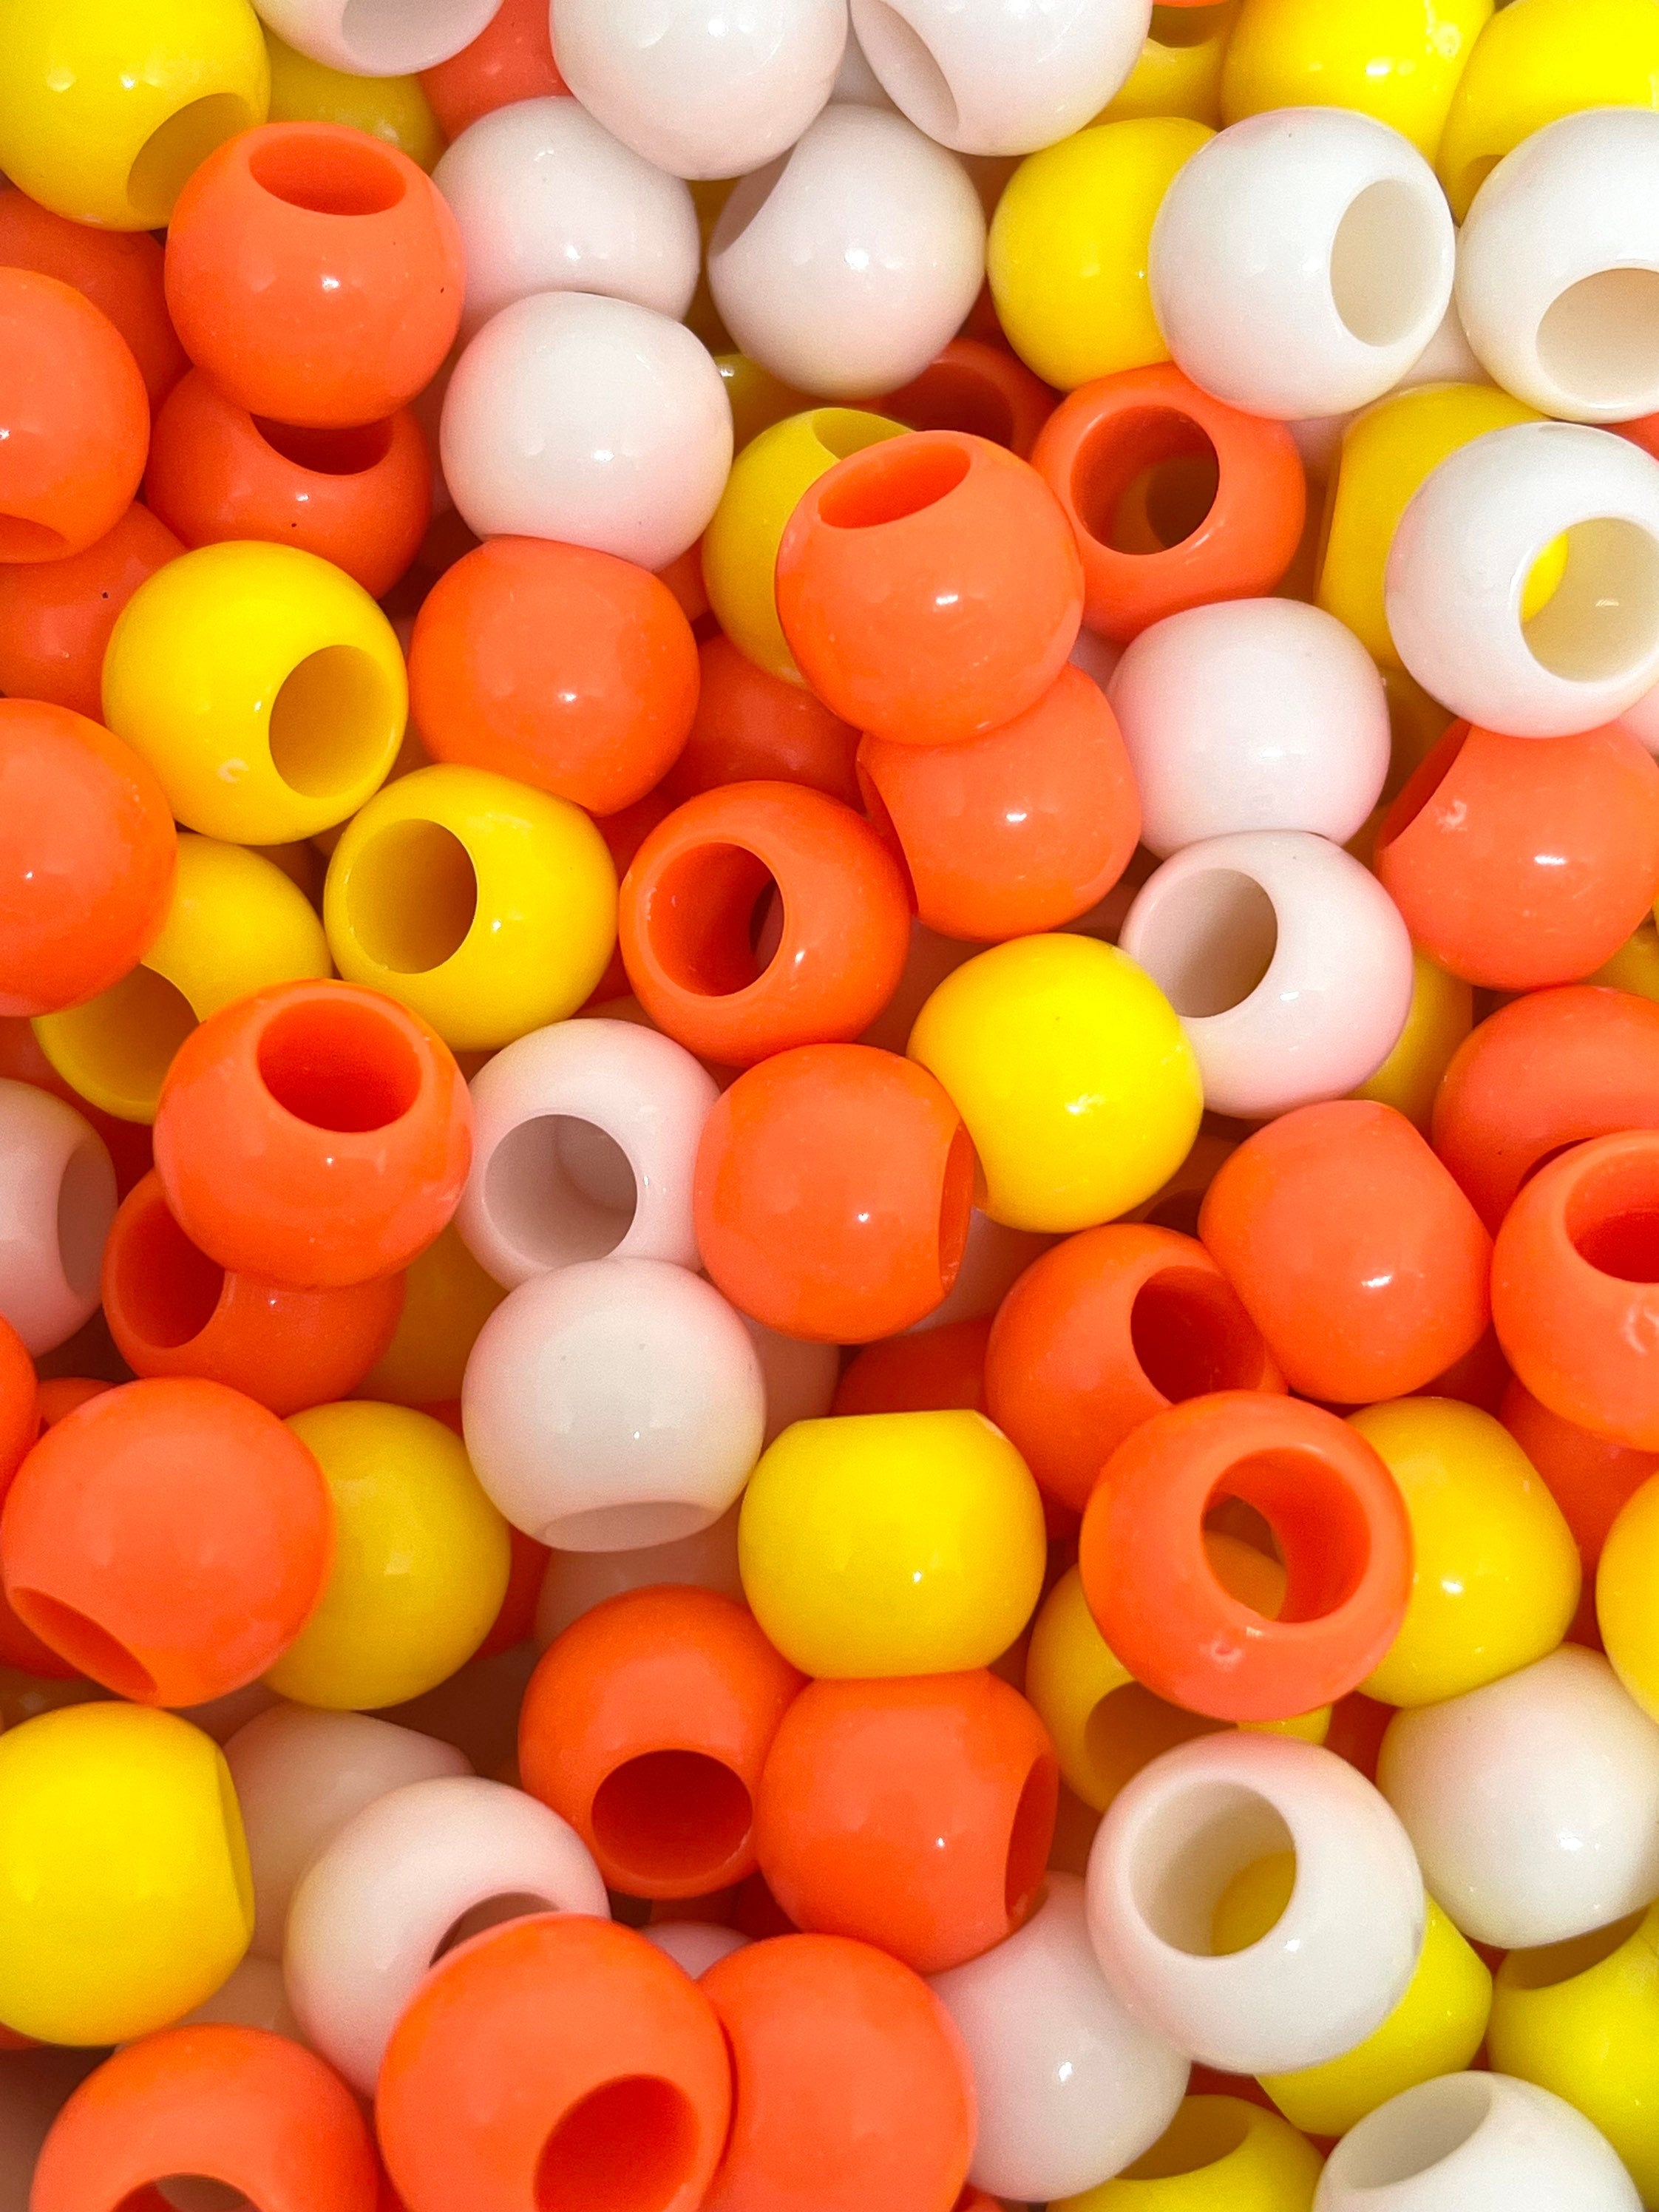 Candy Corn Themed Beads for Halloween, Hair Beads, Candy Beads for Cos